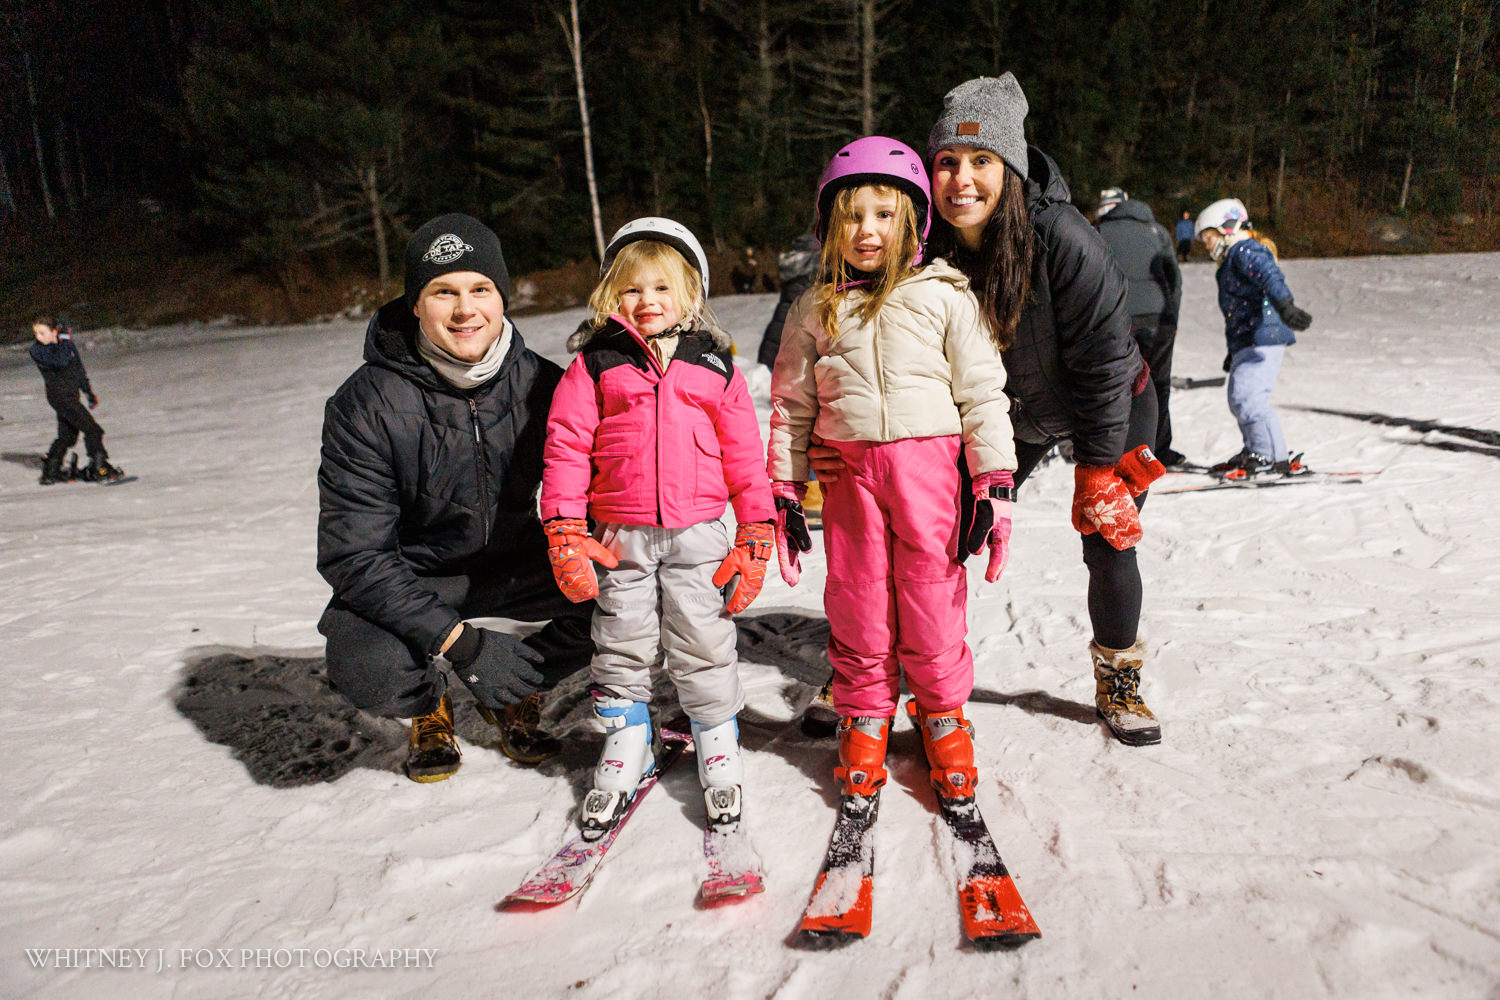 669 winter kids welcome to winter 2022 lost valley auburn maine documentary event photographer whitney j fox 4017 w